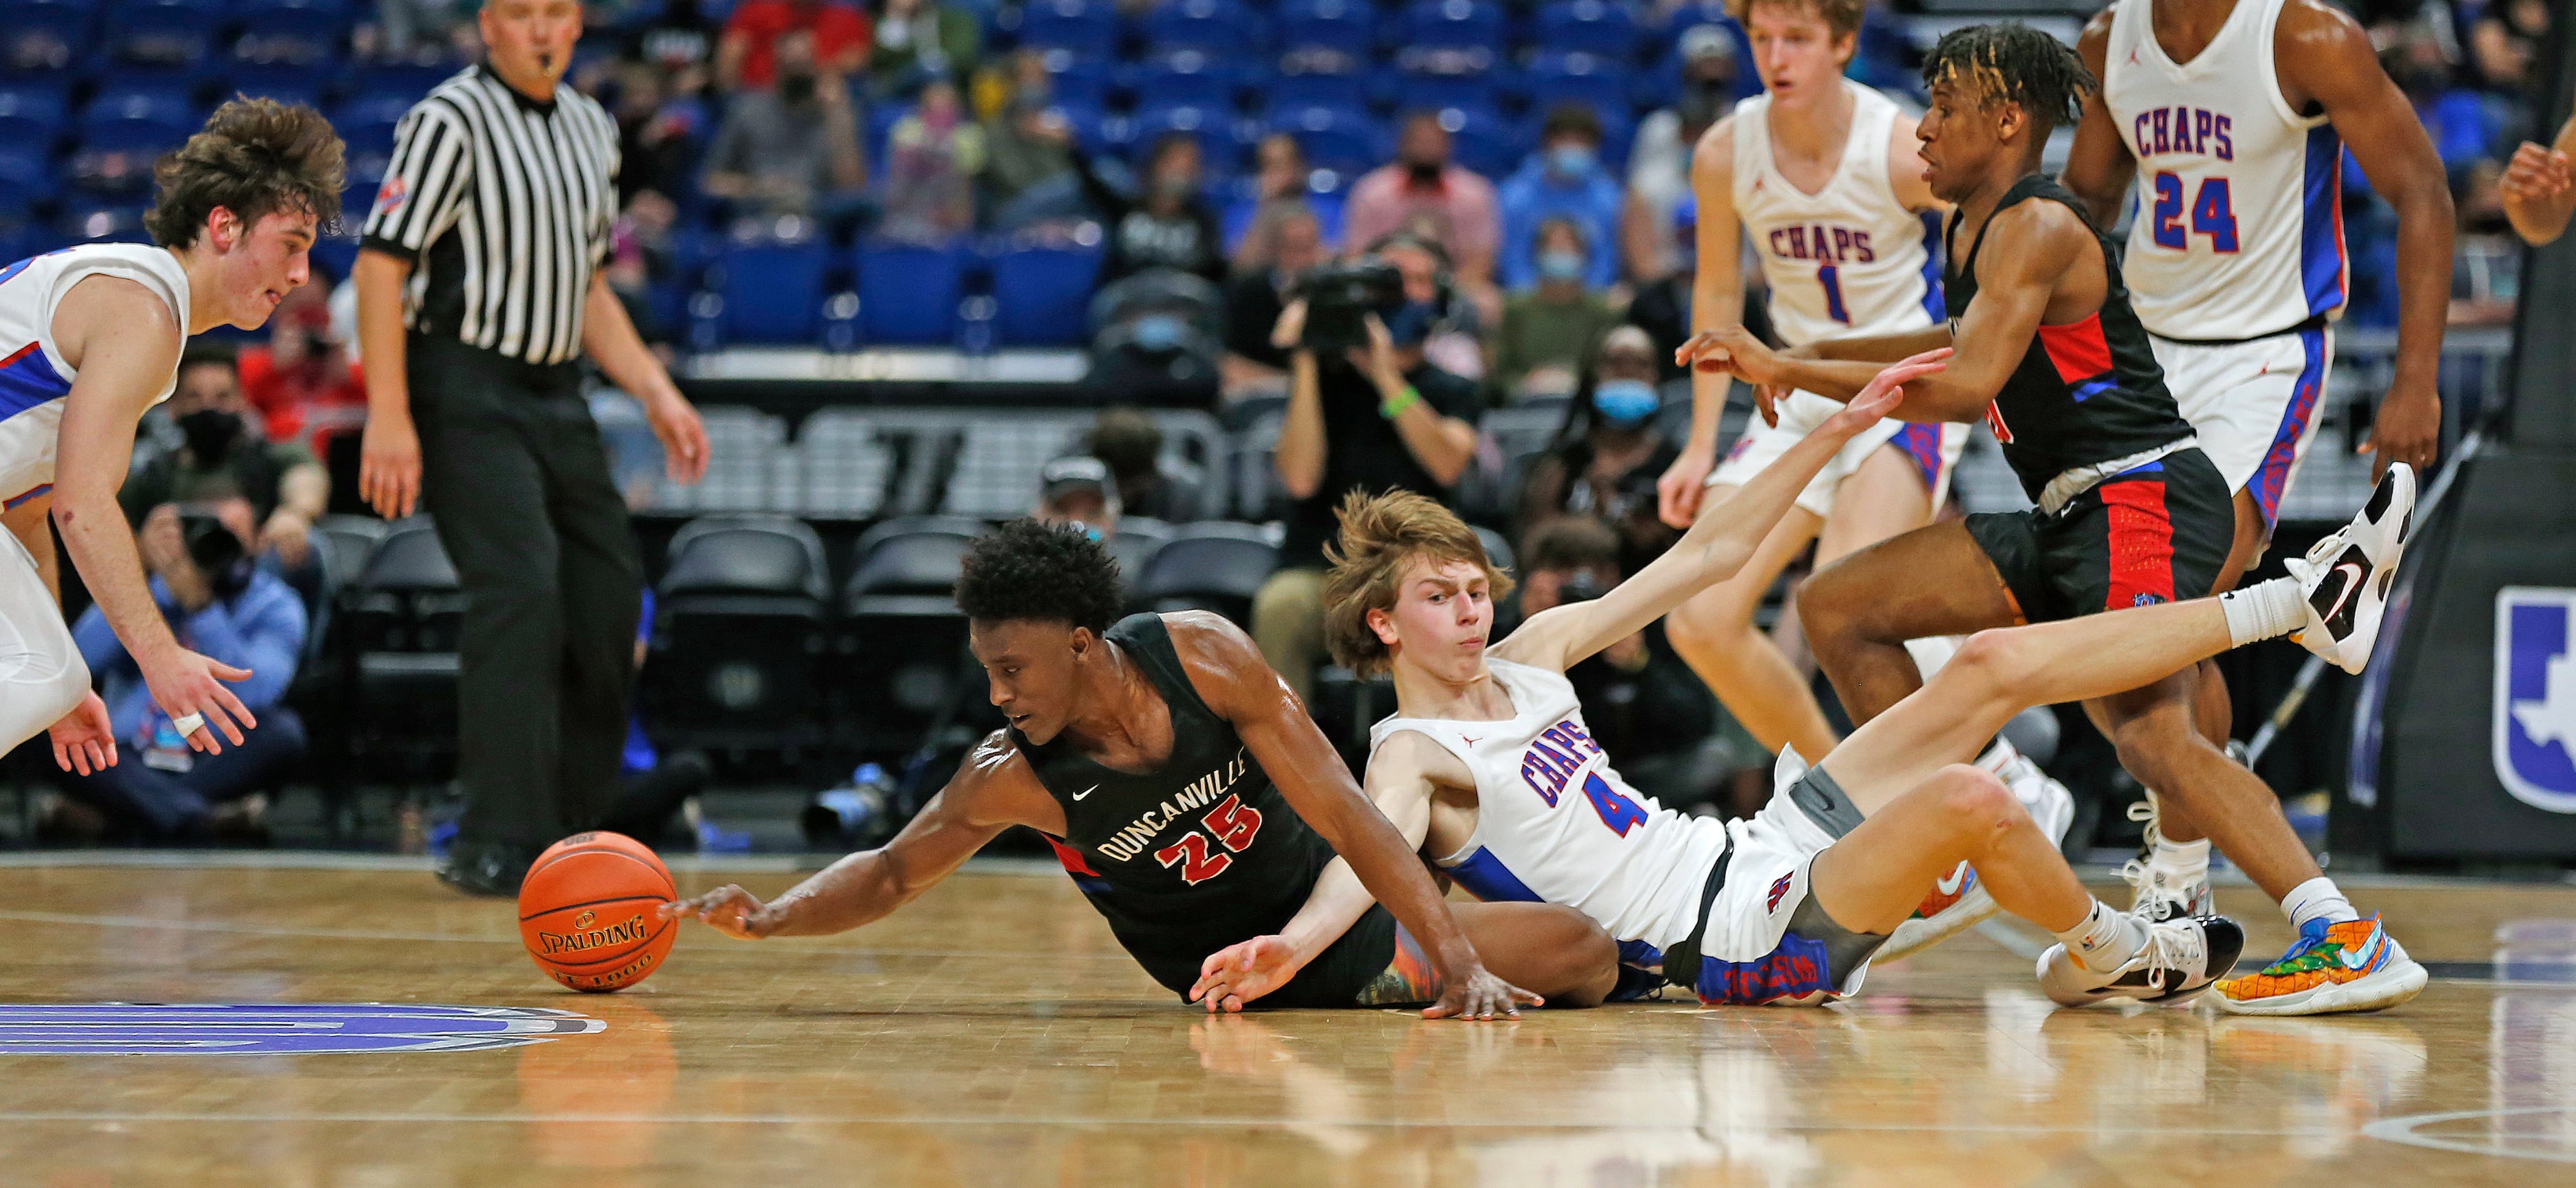 UIL boys Class 6A basketball state championship game between Duncanville and Austin Westlake...